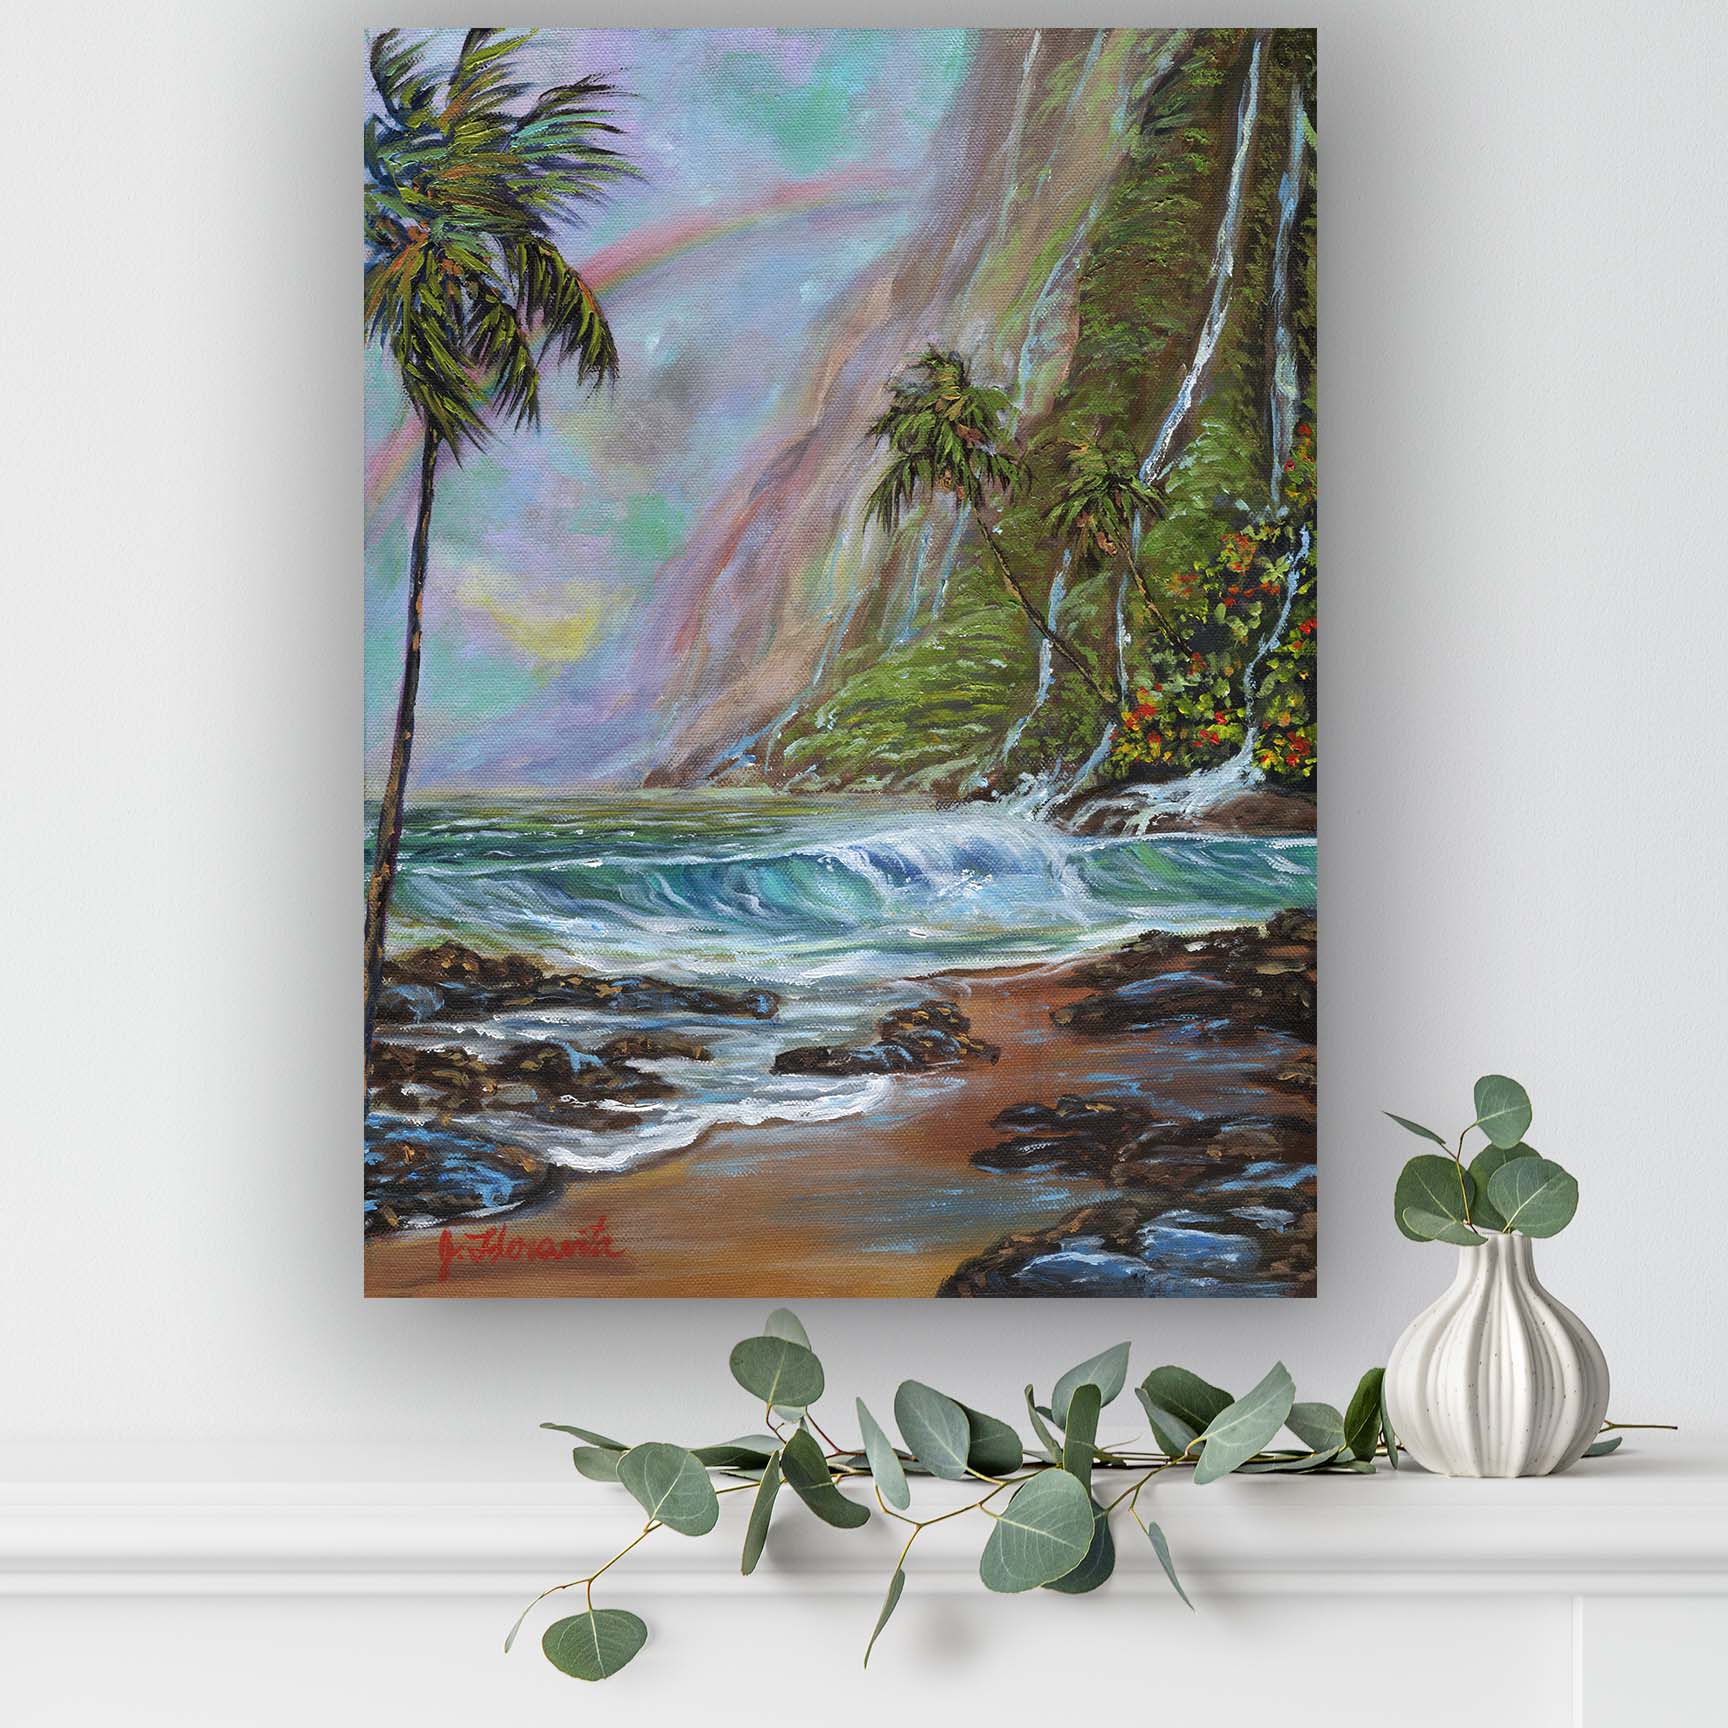 Hawaii Painting Original Art Watercolor Seascape Small Artwork Landscape Wall Art 4 By 6 By Taisiart Art & Collectibles Painting Sibawor.id